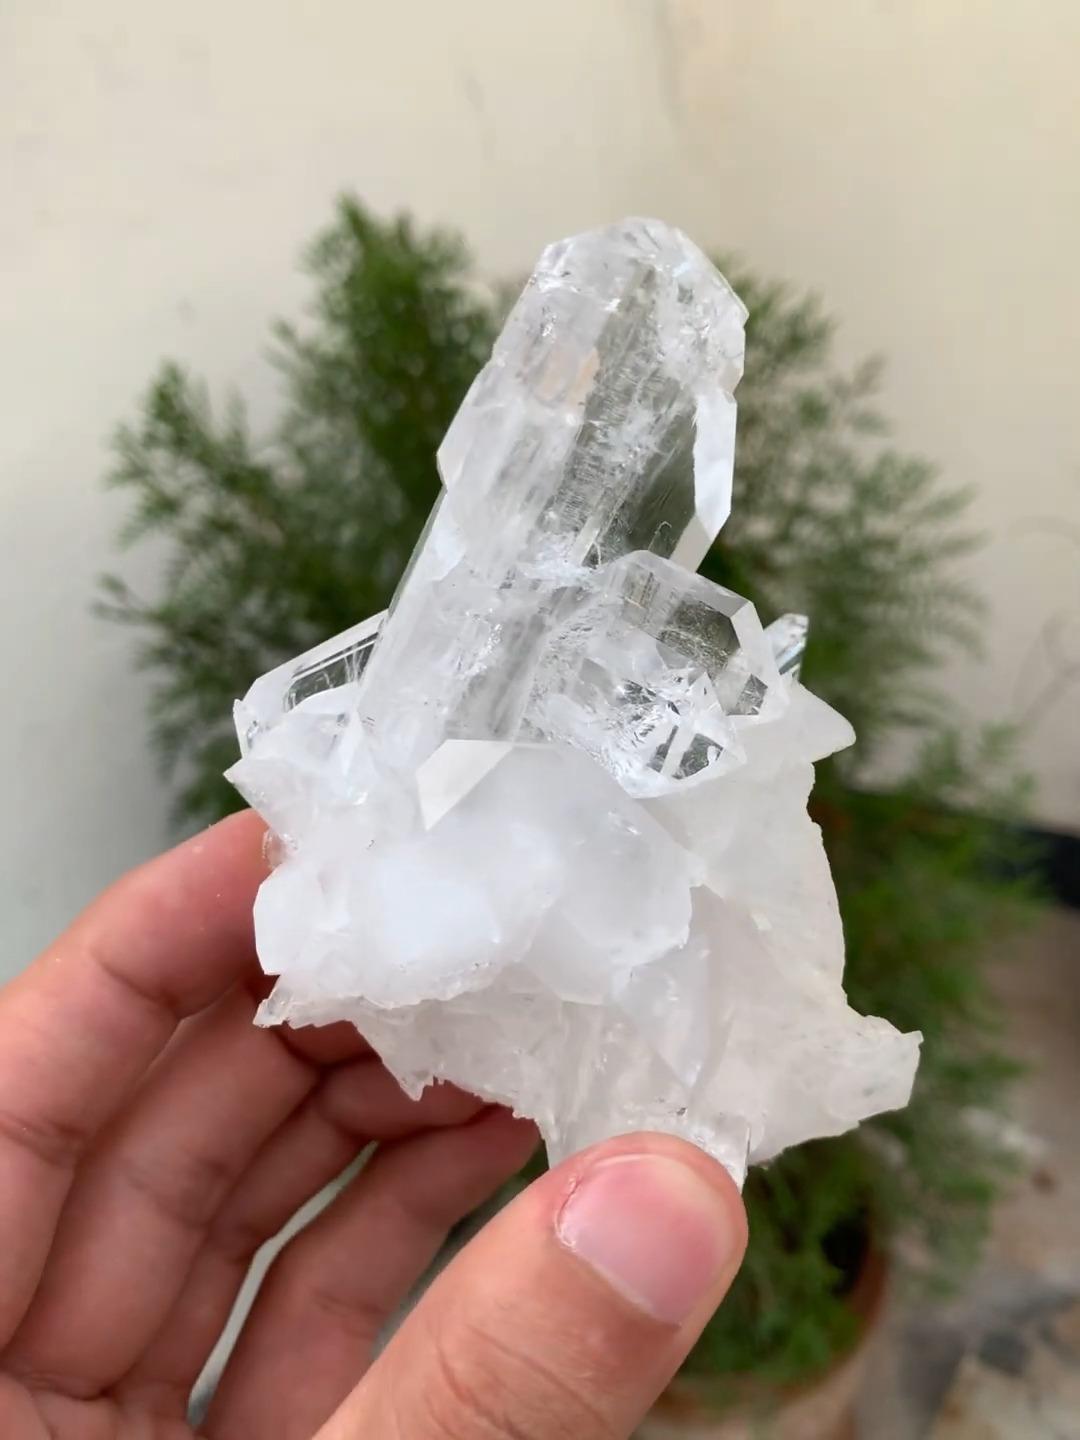 Uncut Artistic Formation Of Tabular Faden Clear Quartz Crystals Spacemen From Pakistan For Sale